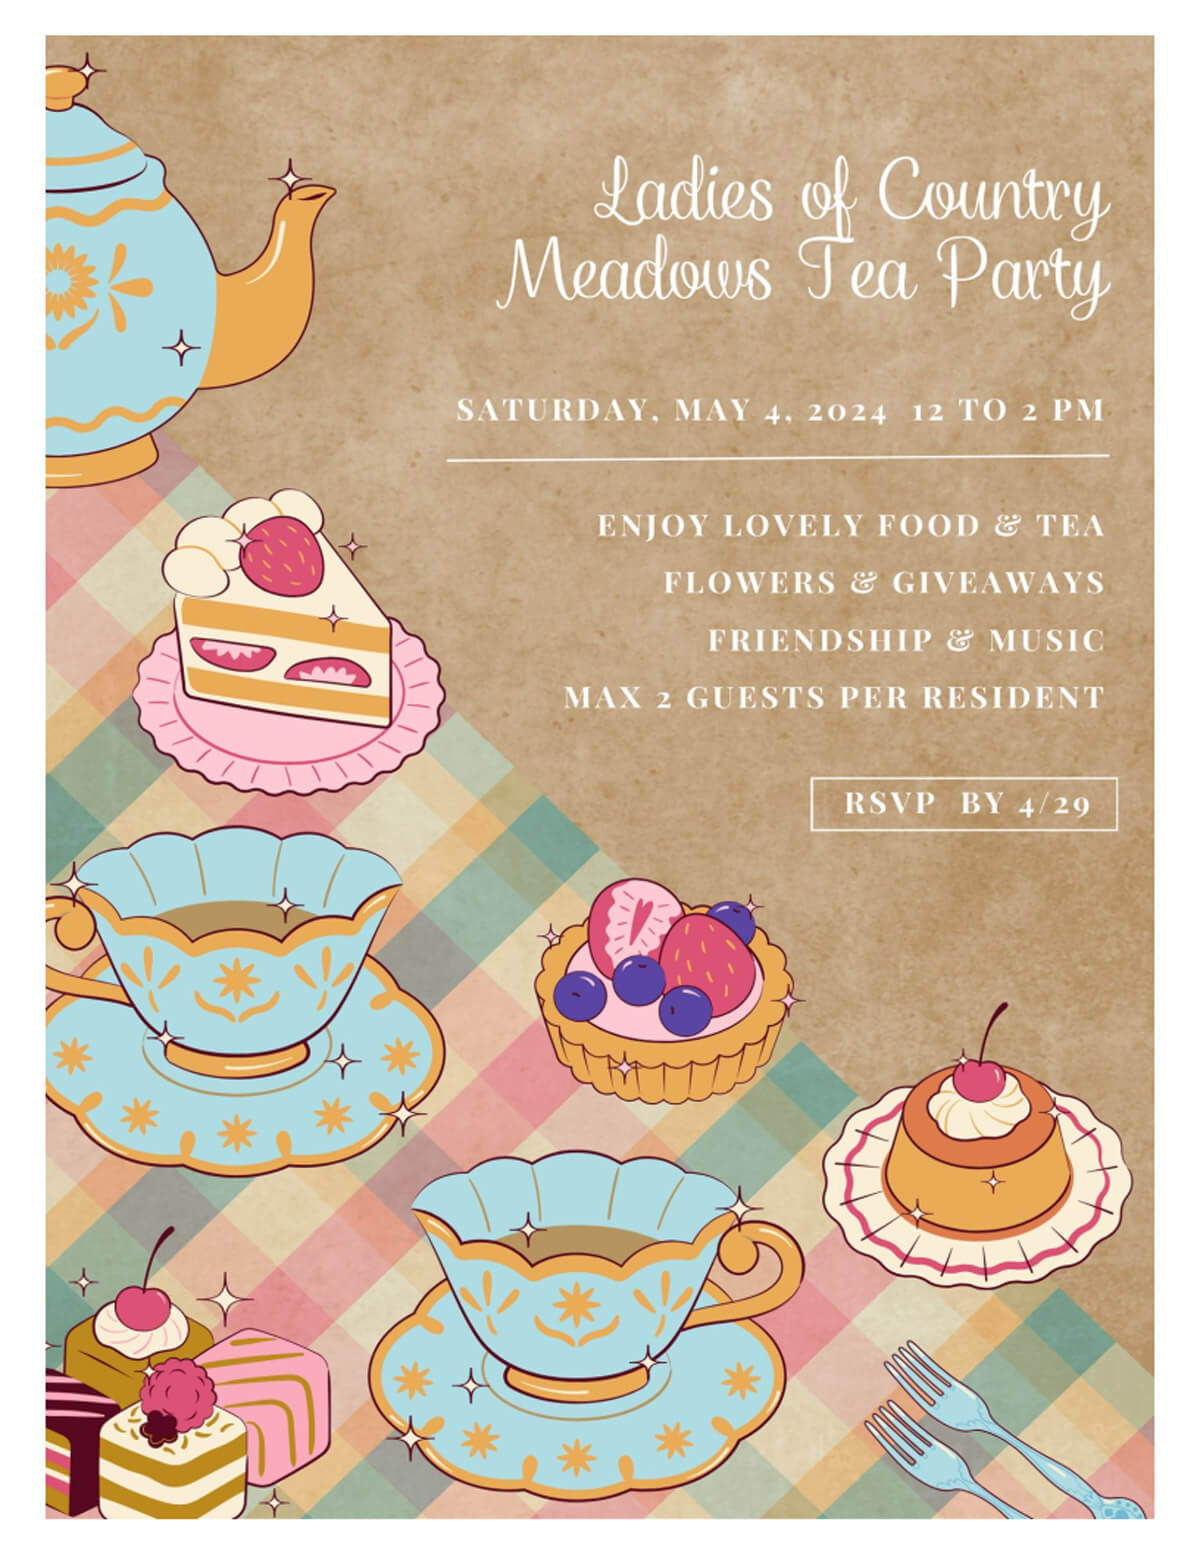 Ladies of Country Meadows Tea Party: Enjoy lovely food & tea, flowers & giveaways, friendship & music.